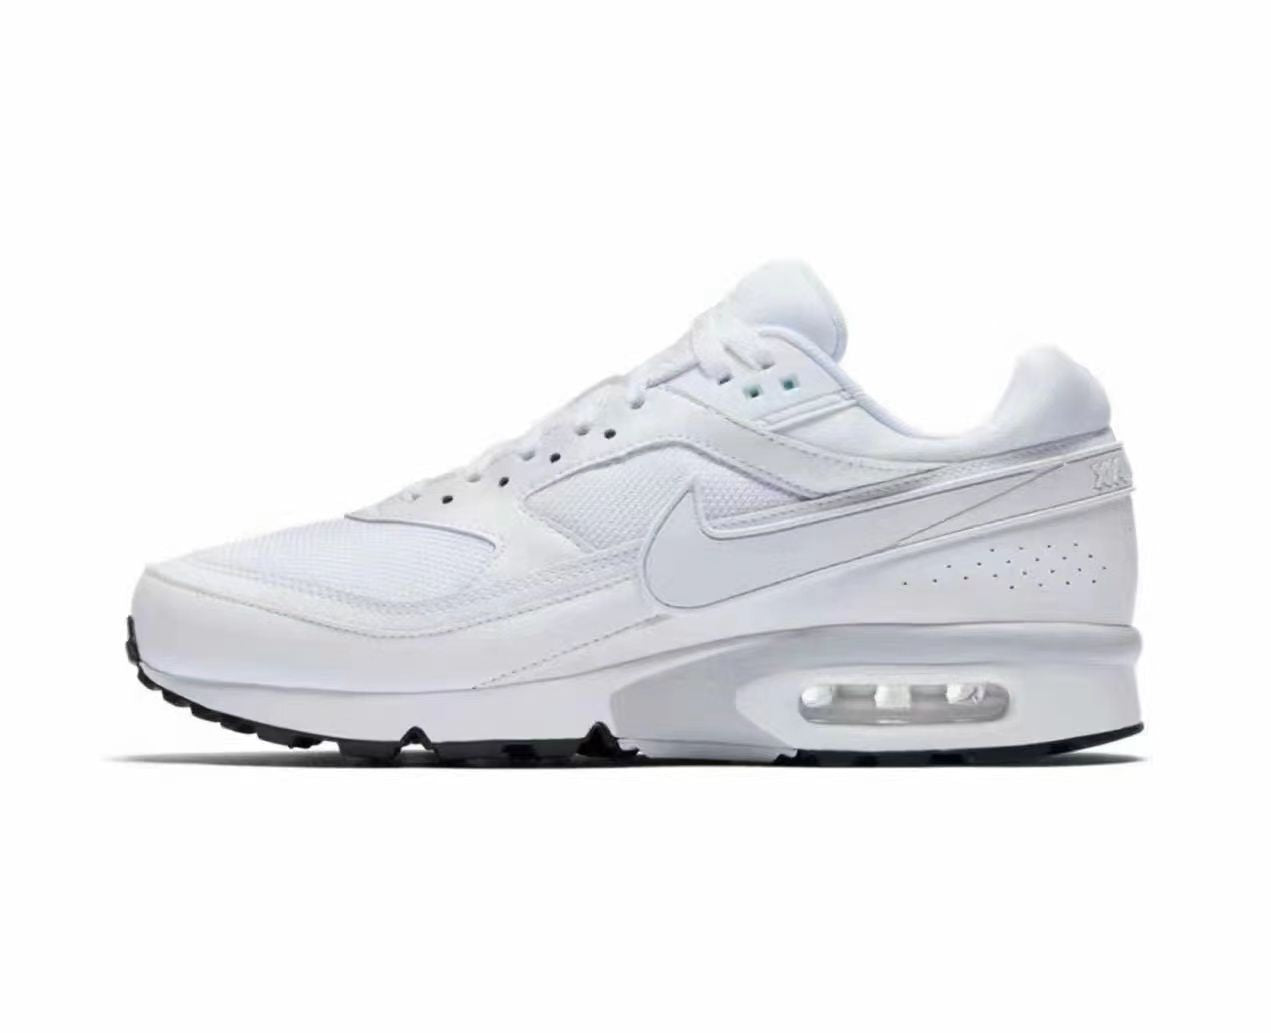 Nike Air Max BW “White-Pink” – The